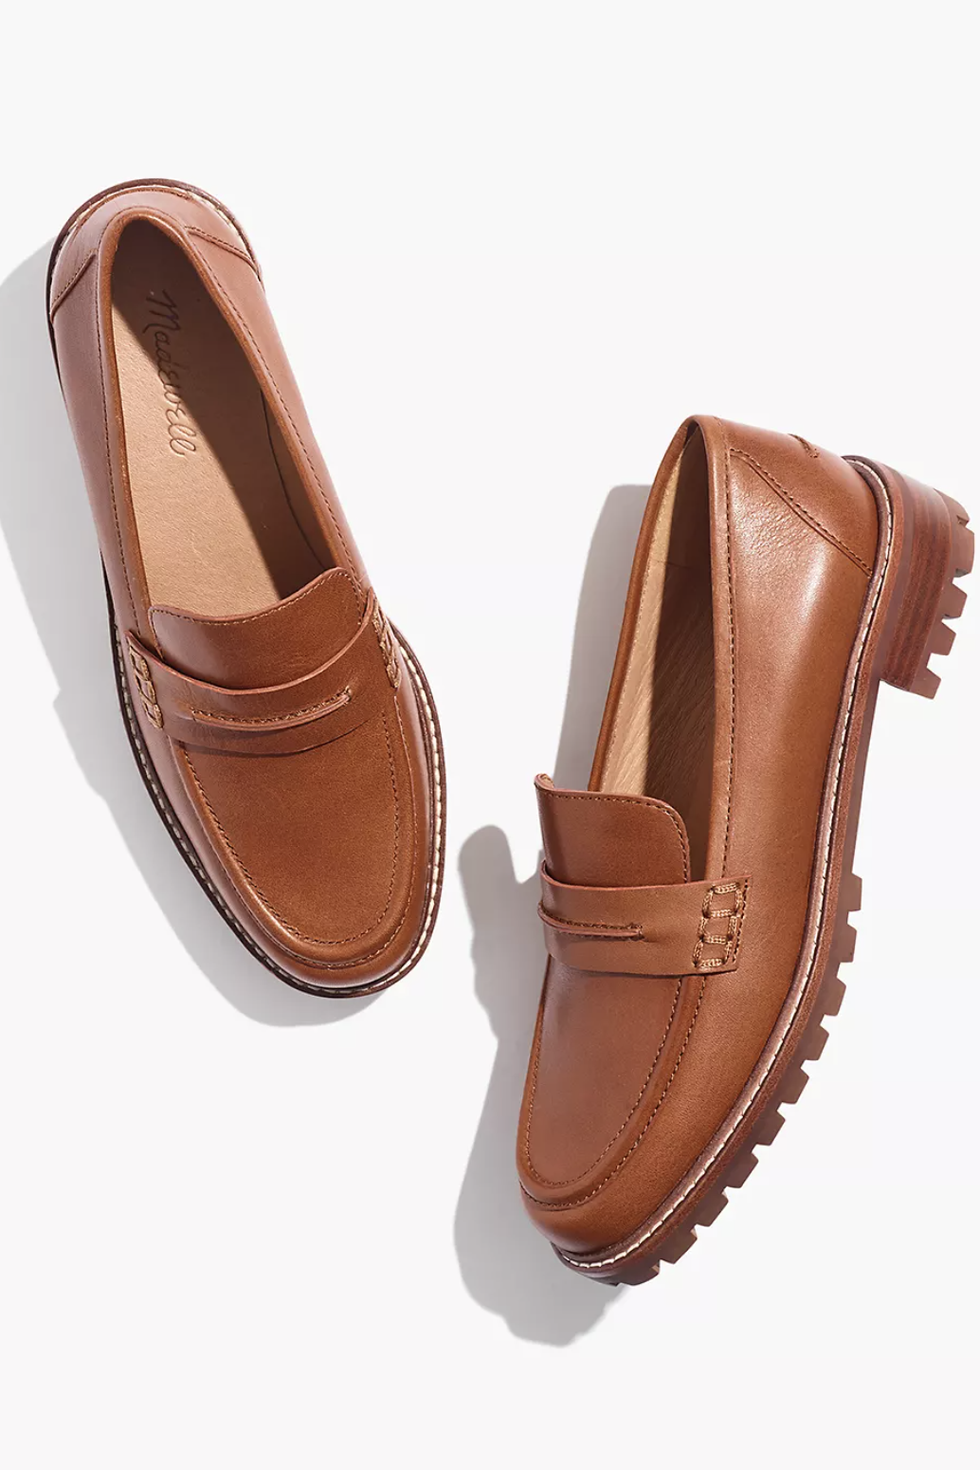 28 Best Loafers for Women — Cute and Comfy Loafers to Buy